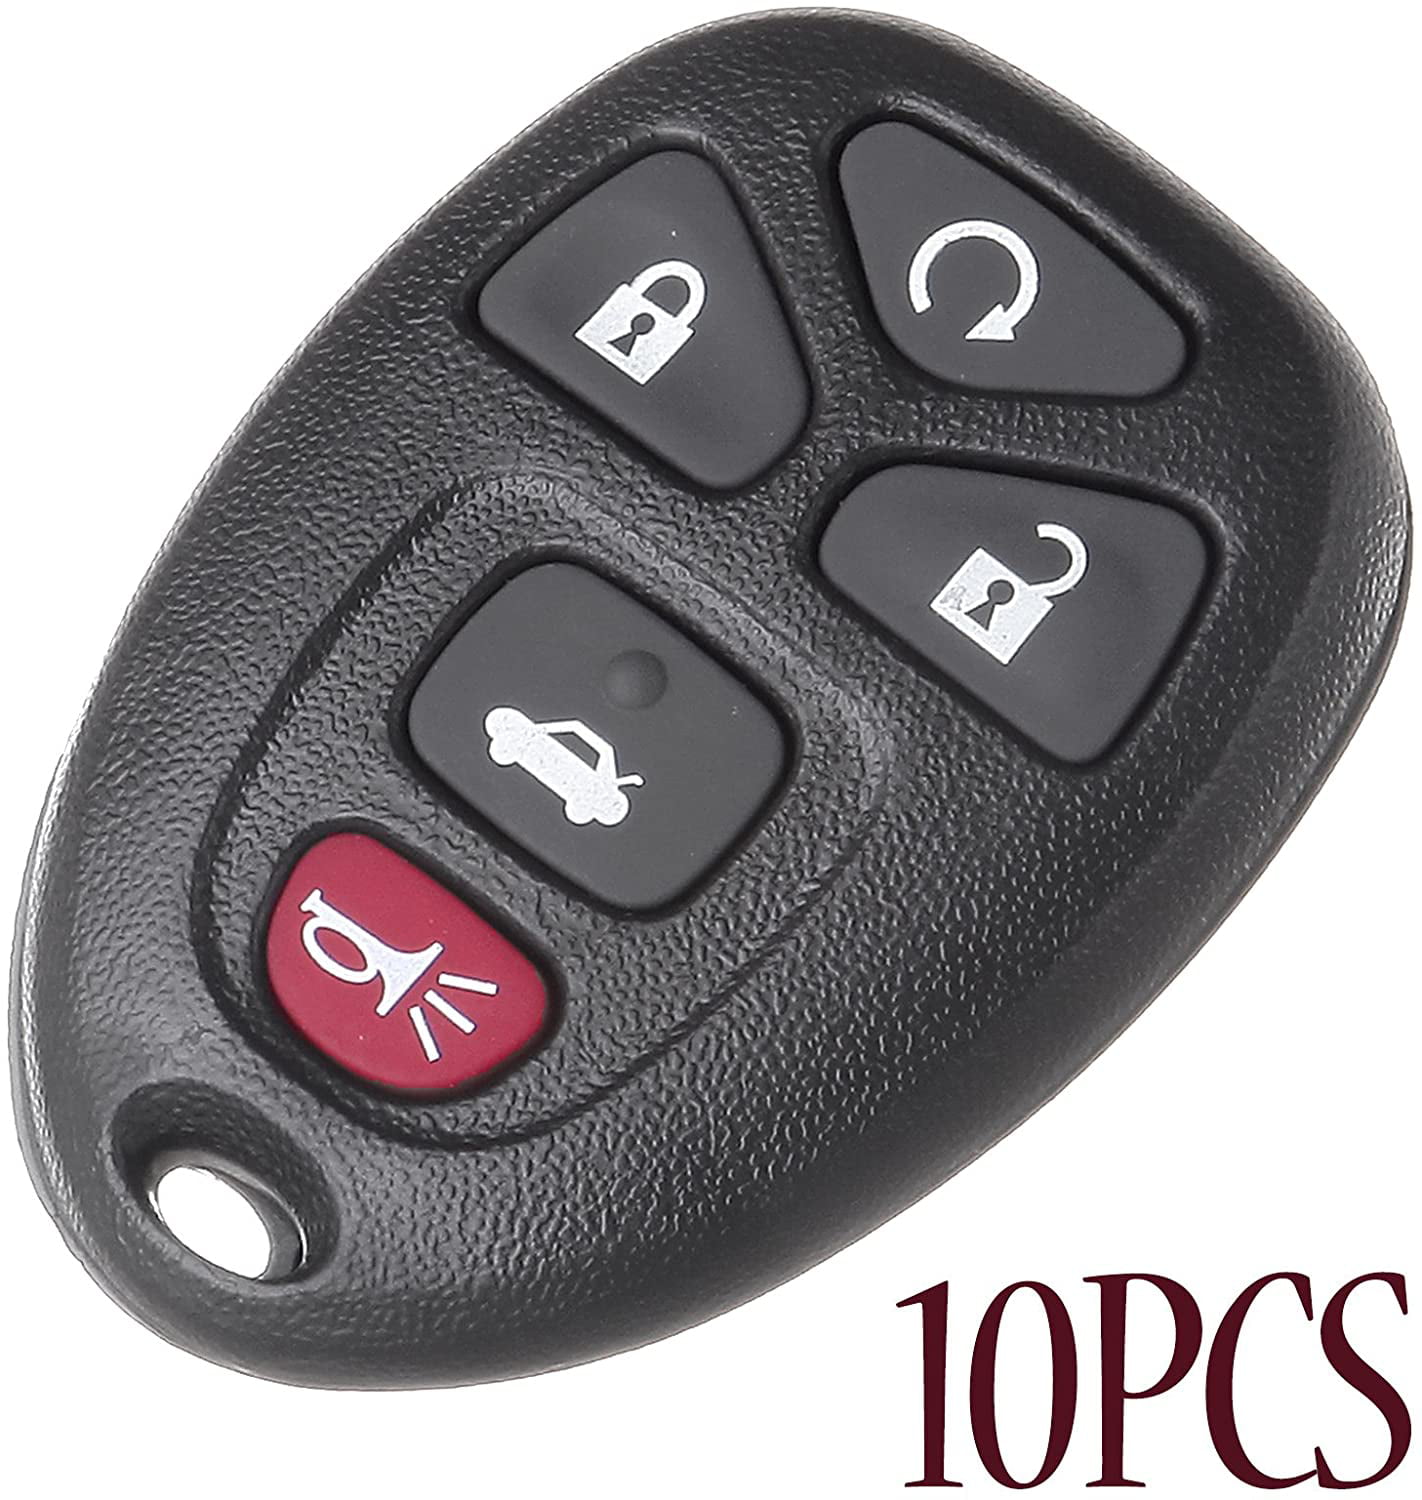 10Pcs Keyless 4 Button Remote Key Shell Case For Gm Buick Cadillac Chevrolet FOB 